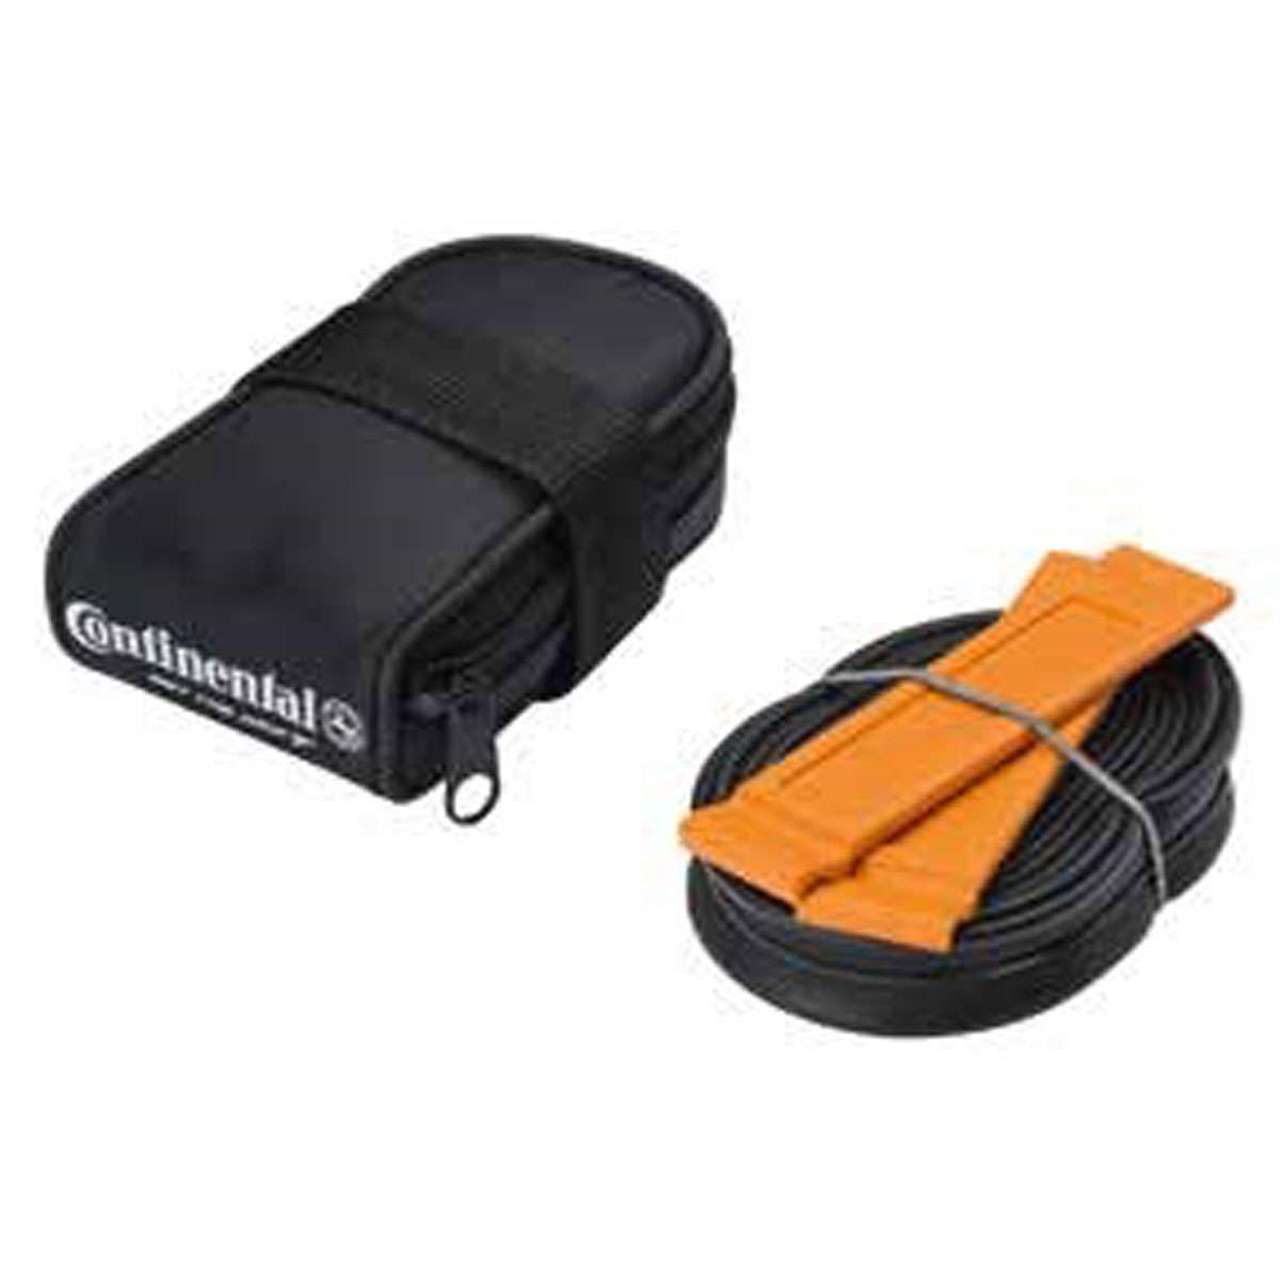 Bicycle Warehouse Saddle Bag w/ 700c 60mm tube & 2 tire levers